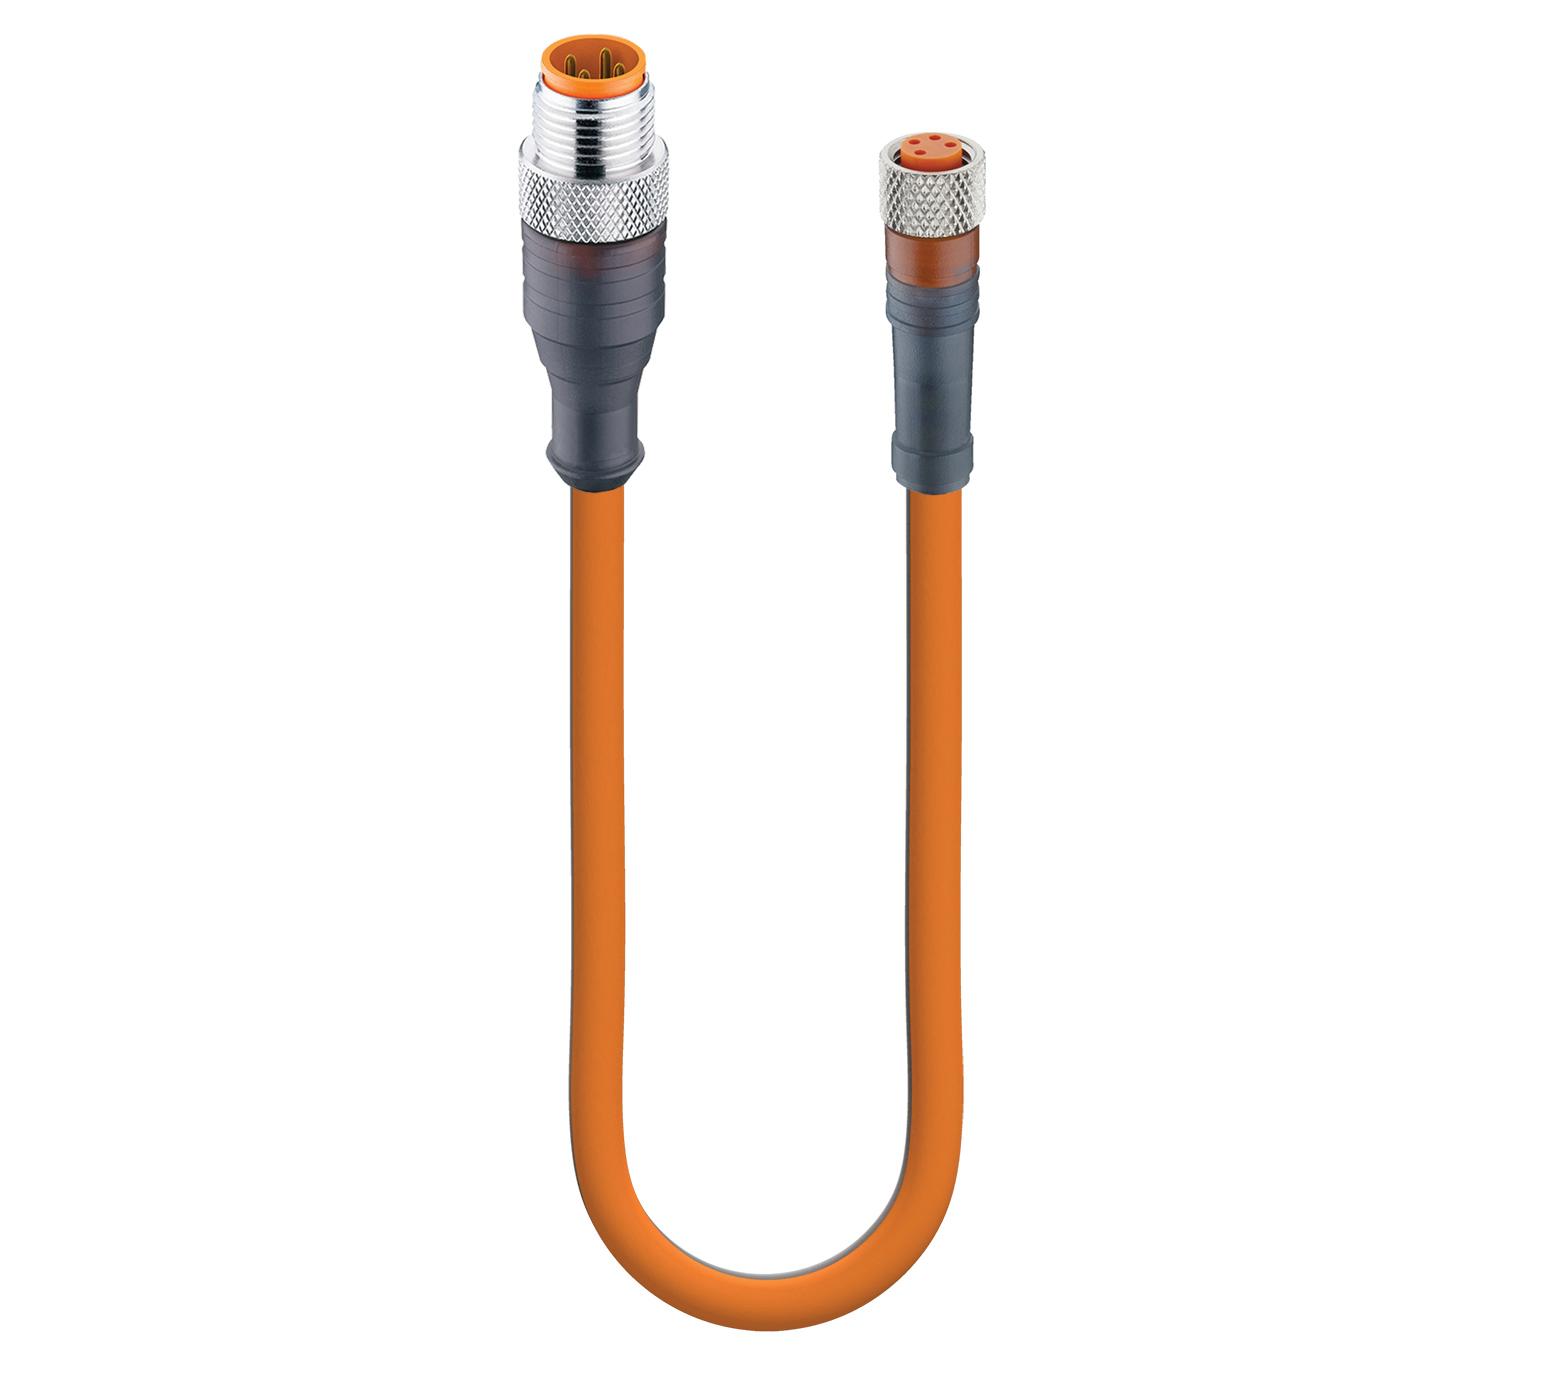 Belden 70608 Sensor/Actuator Double-Ended Cordset: Male straight A-coded translucent 4-pin M12 Standard connector to female straight A-coded translucent 4-pin M8 Standard connector, 30 V AC/DC, 4 A; PVC orange cable, 4-wires, 0.25 mm², RST 4-RKMV 4-07/2 M, 2 m